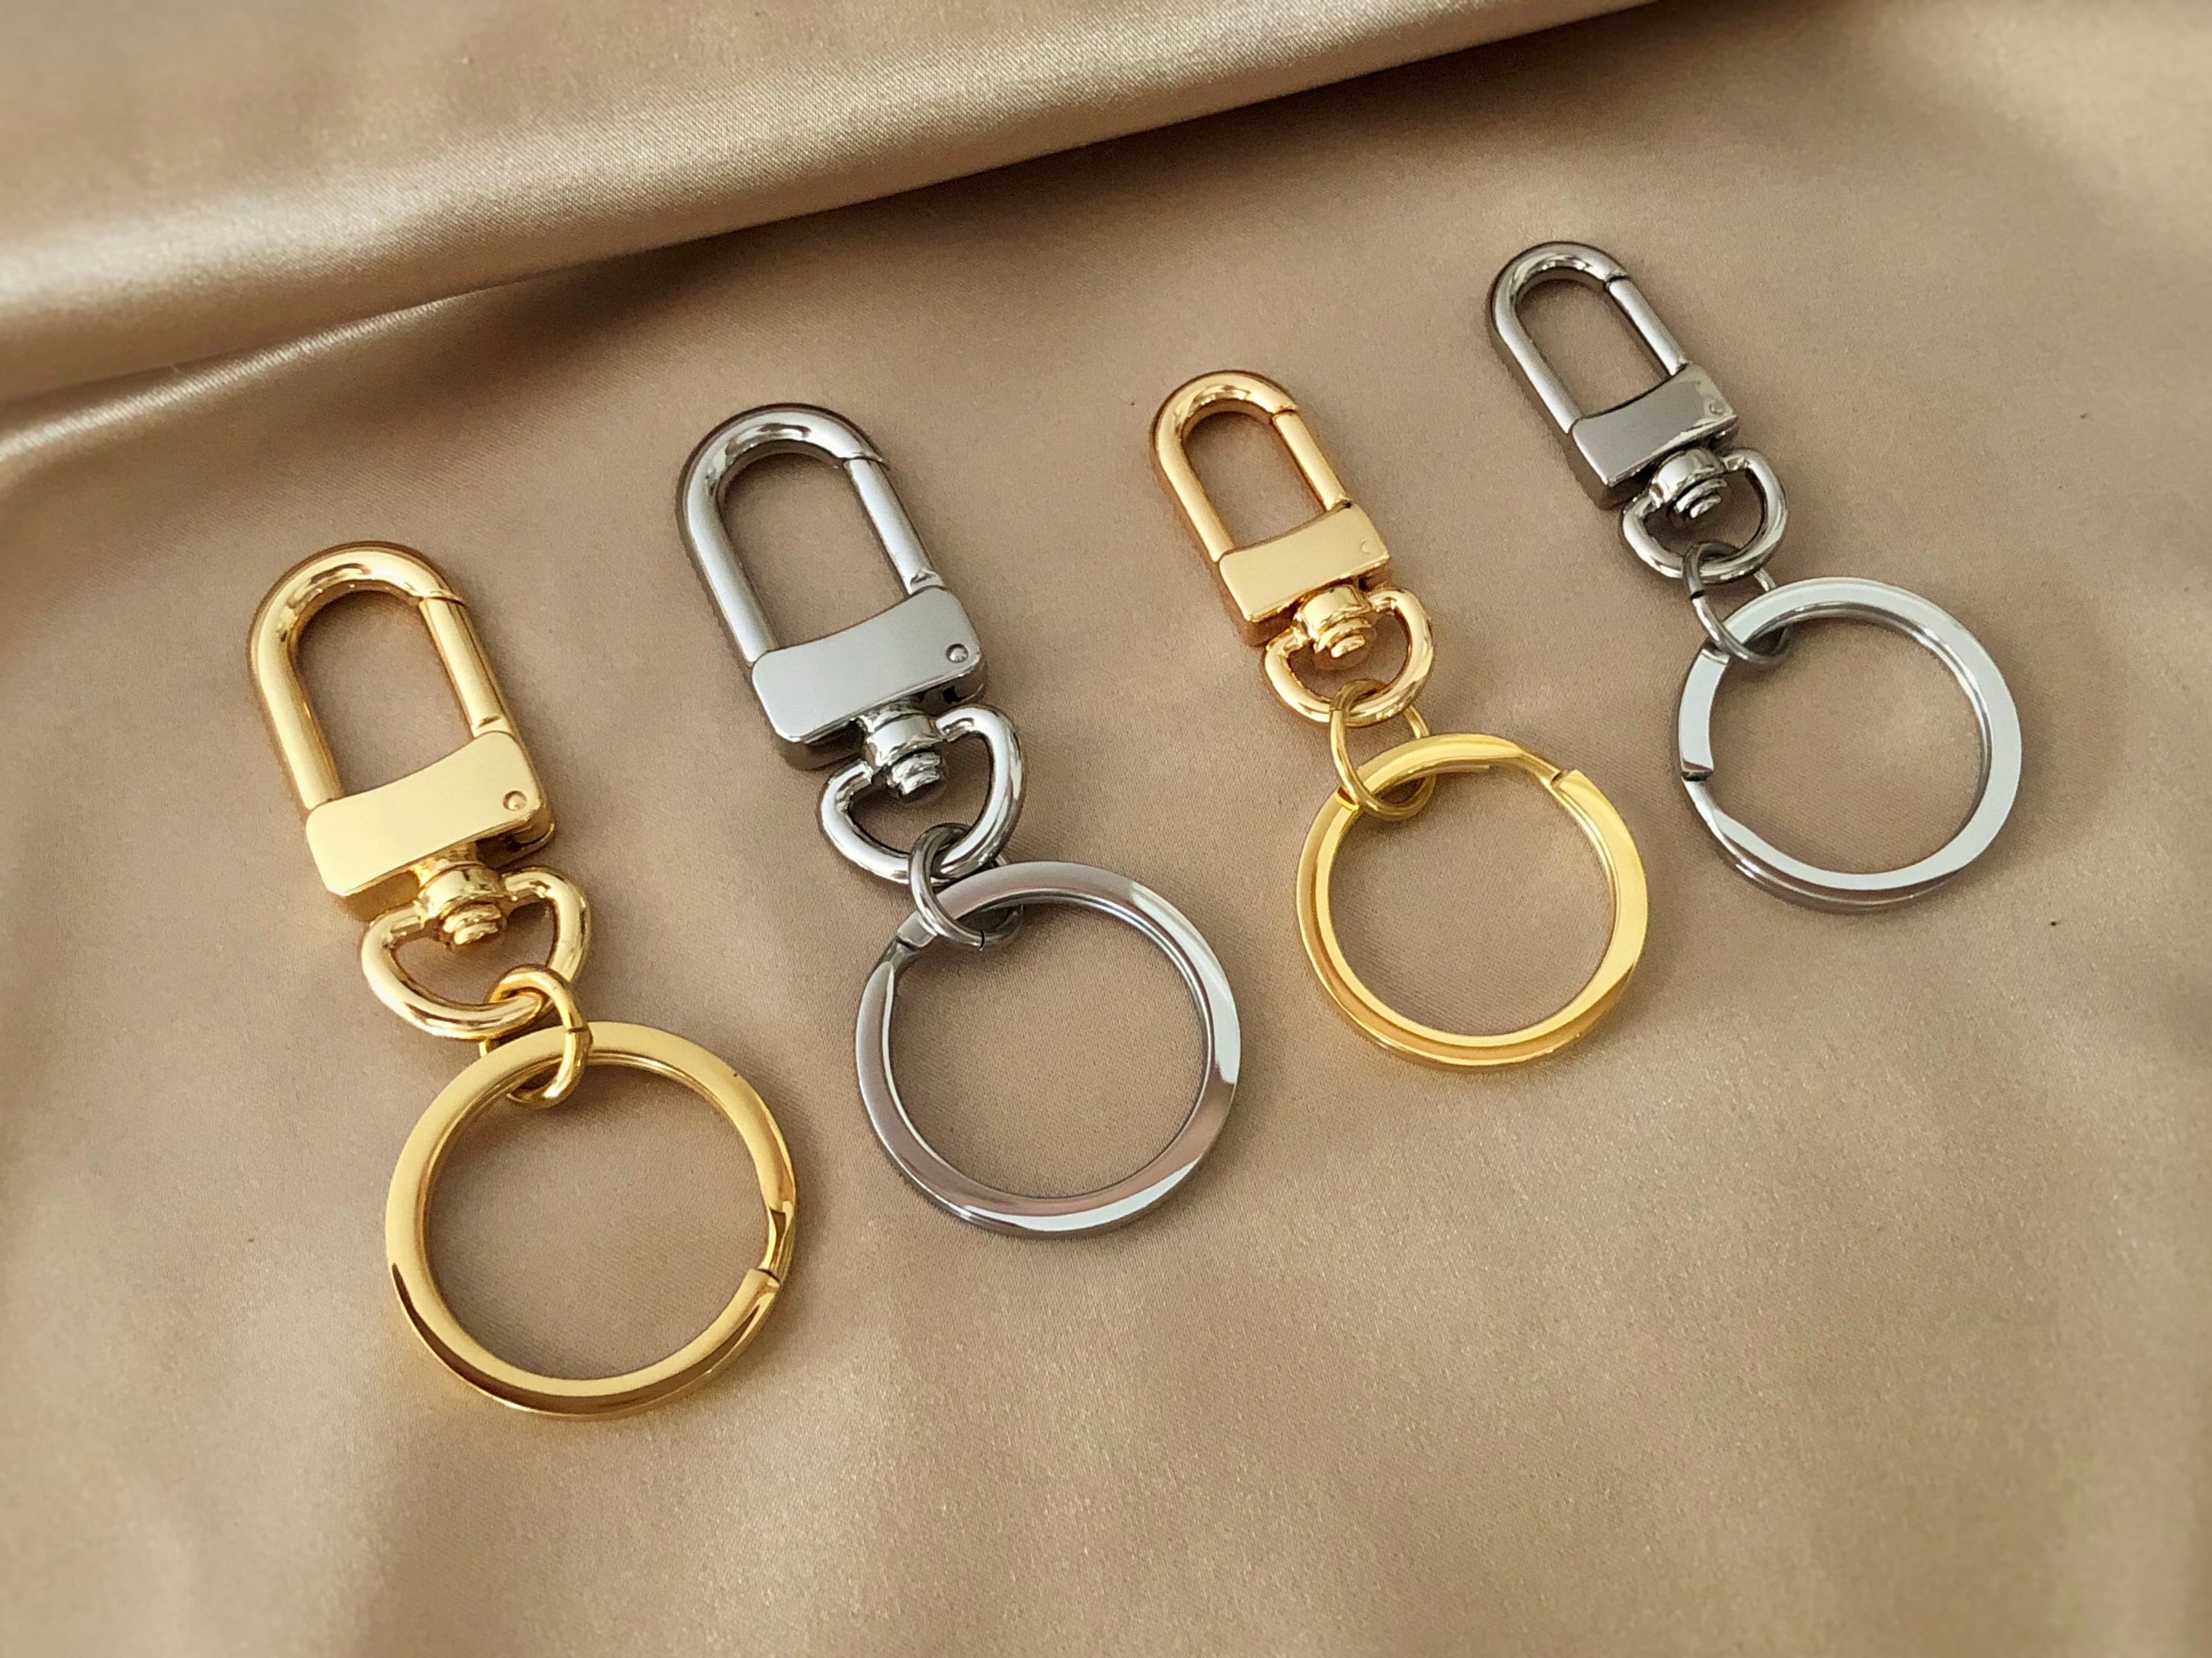 2pcs Polished Whole Stainless Steel Keyring Keychain Split Ring Gold plated  with Short Chain Key Rings Women Men DIY Key Chains